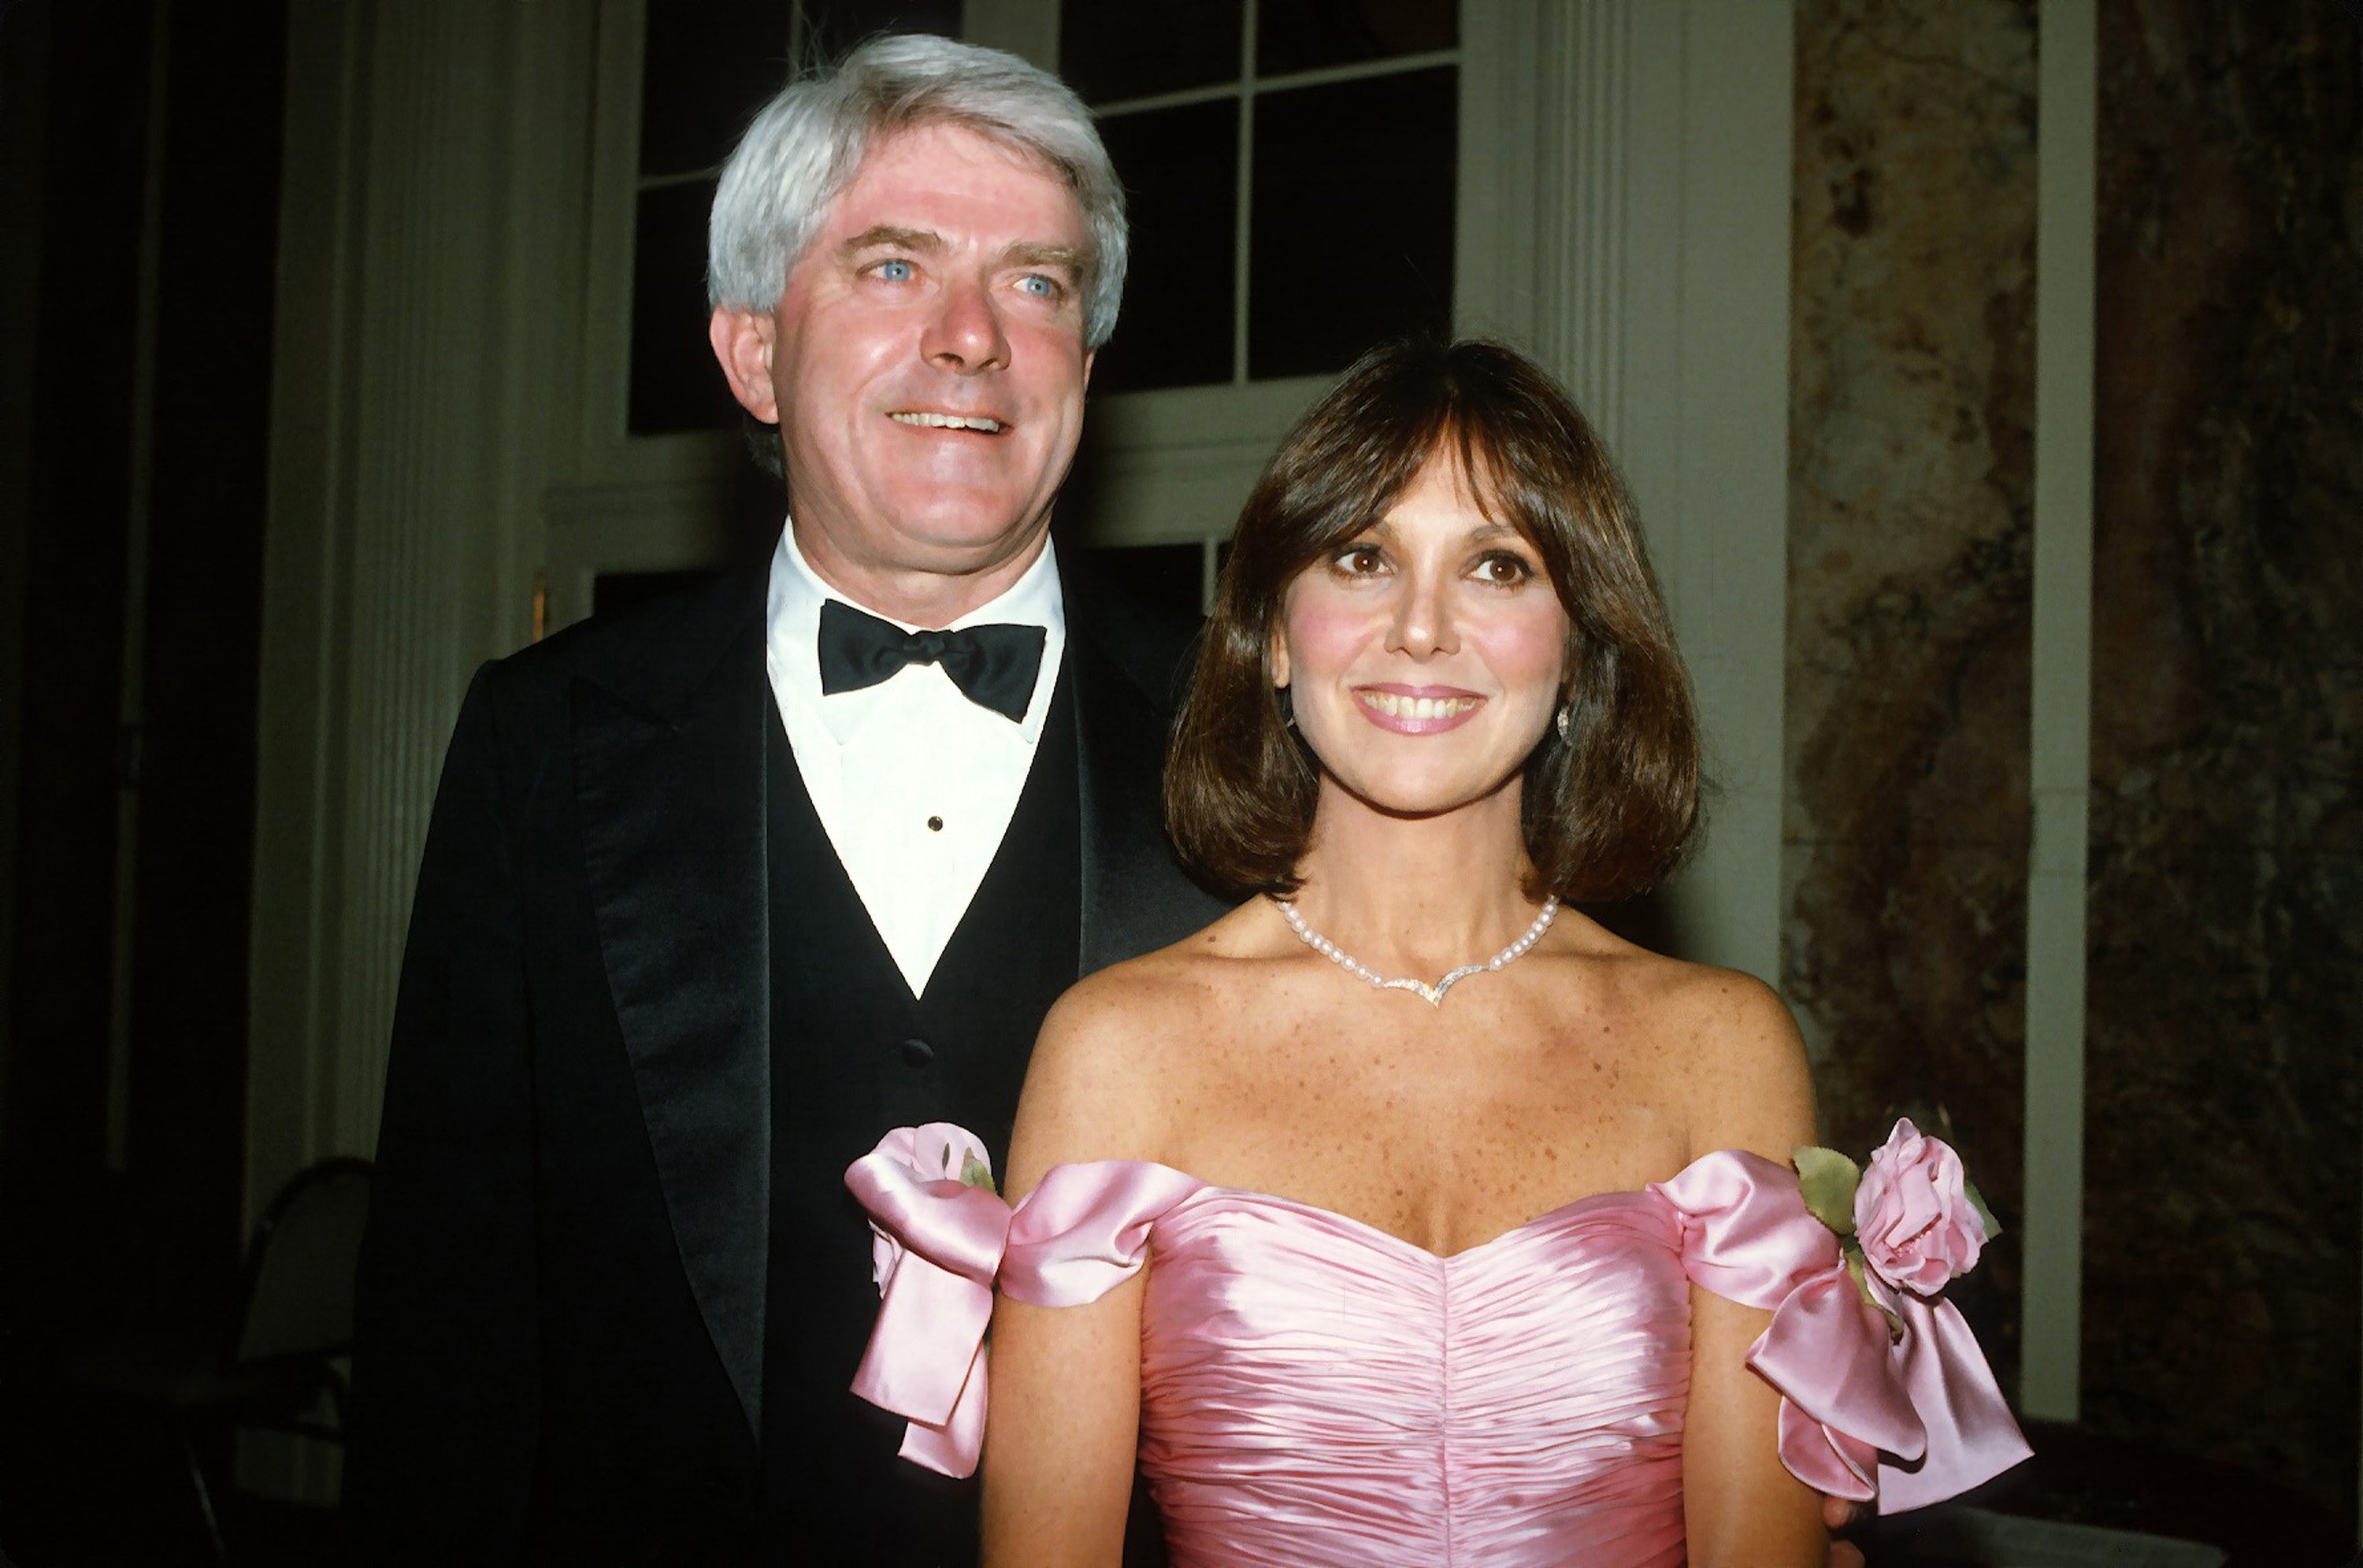 Phil Donohue and Marlo Thomas pose for a photograph at Gloria Steinem's 50th birthday celebration May 23, 1984 in New York City | Photo: GettyImages